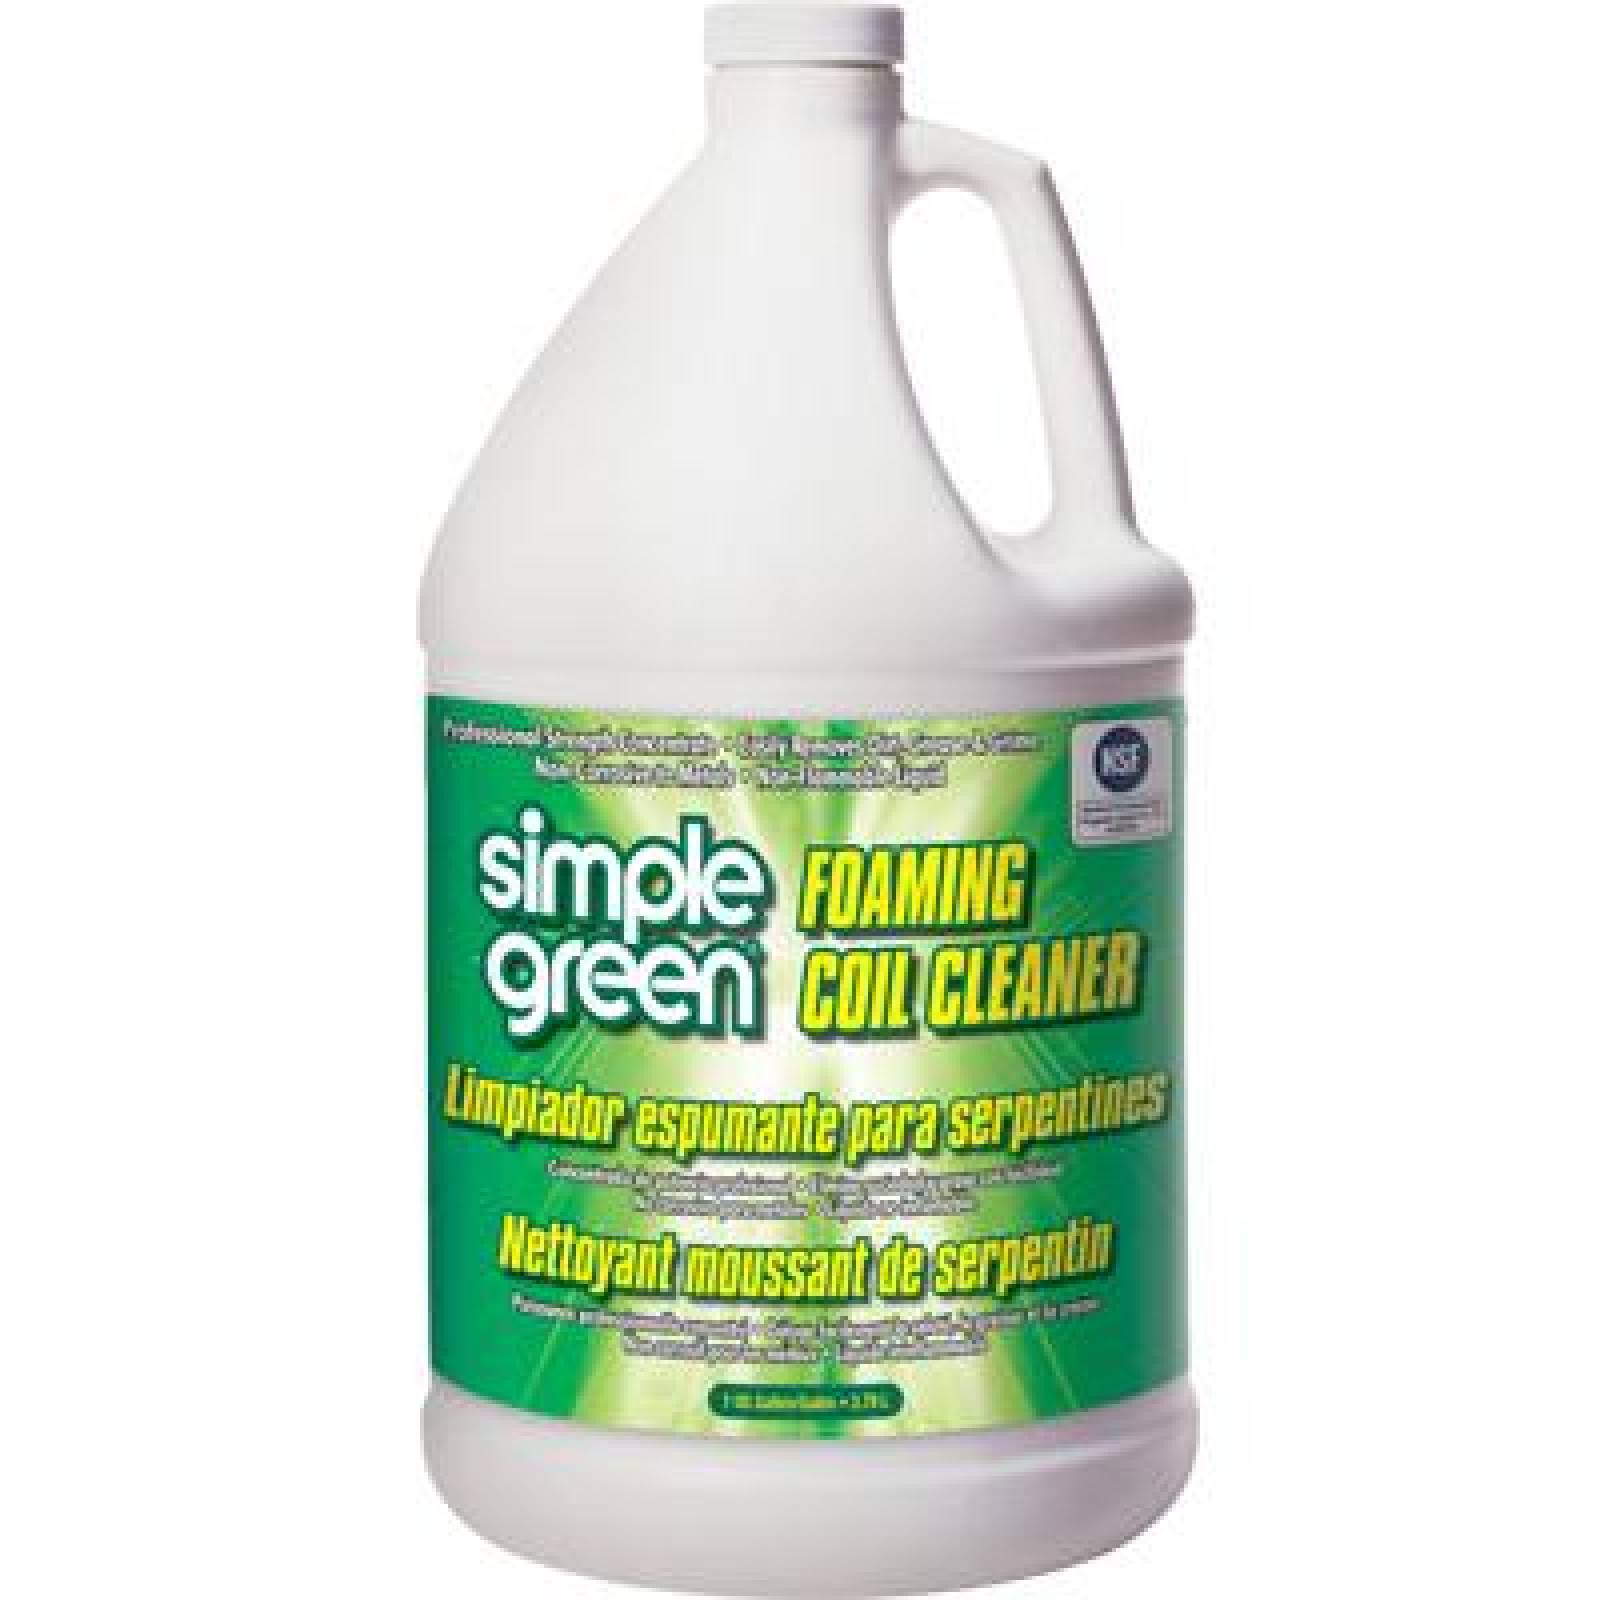 Simple Green Foaming Coil Cleaner 1 Gallon Bottle 